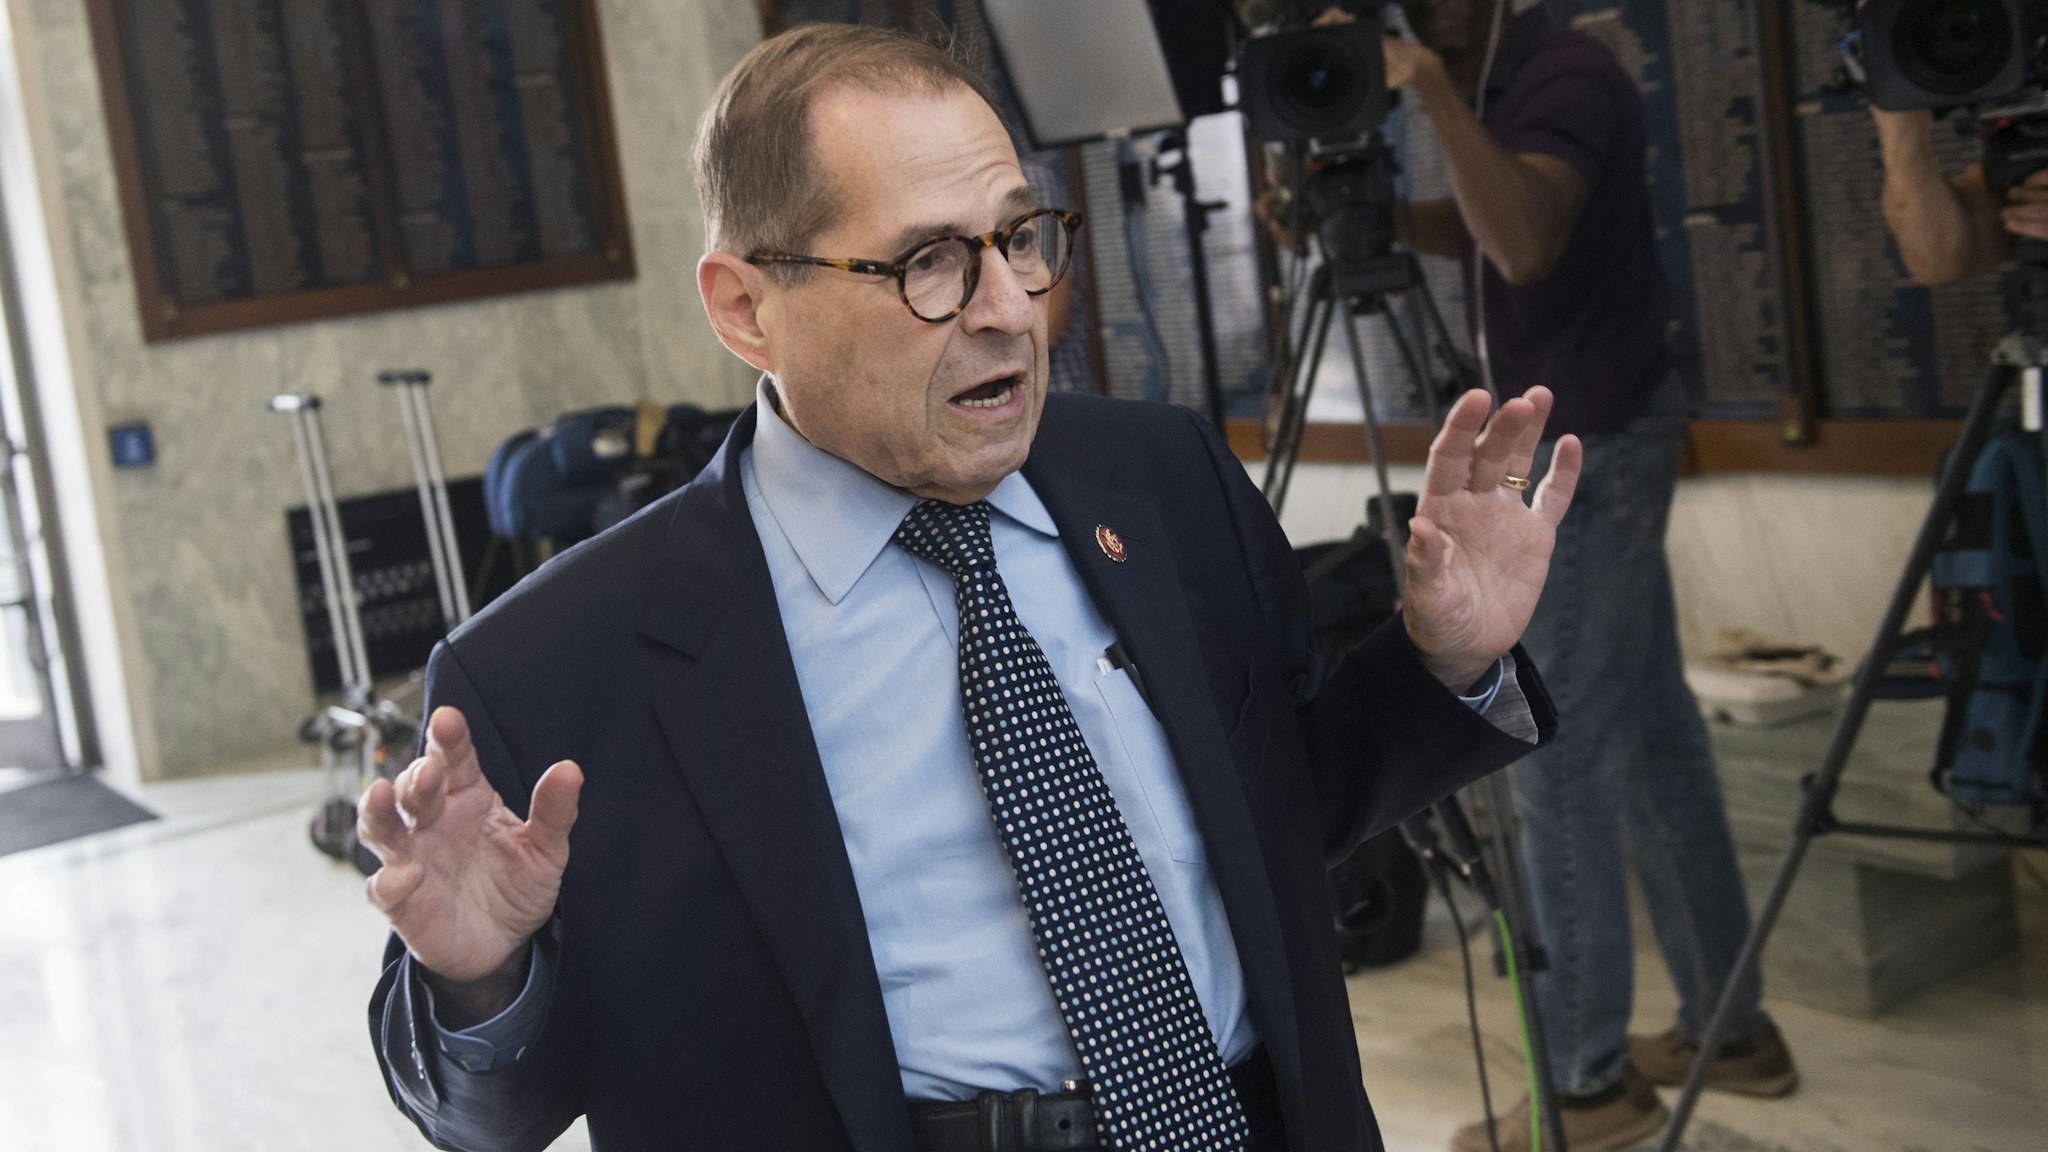 UNITED STATES - SEPTEMBER 17: Chairman Jerrold Nadler, D-N.Y., arrives for the House Judiciary Committee hearing titled Presidential Obstruction of Justice and Abuse of Power, in Rayburn Building on Tuesday, September 17, 2019. Corey Lewandowski, former campaign manager for the Trump presidential campaign, testified.